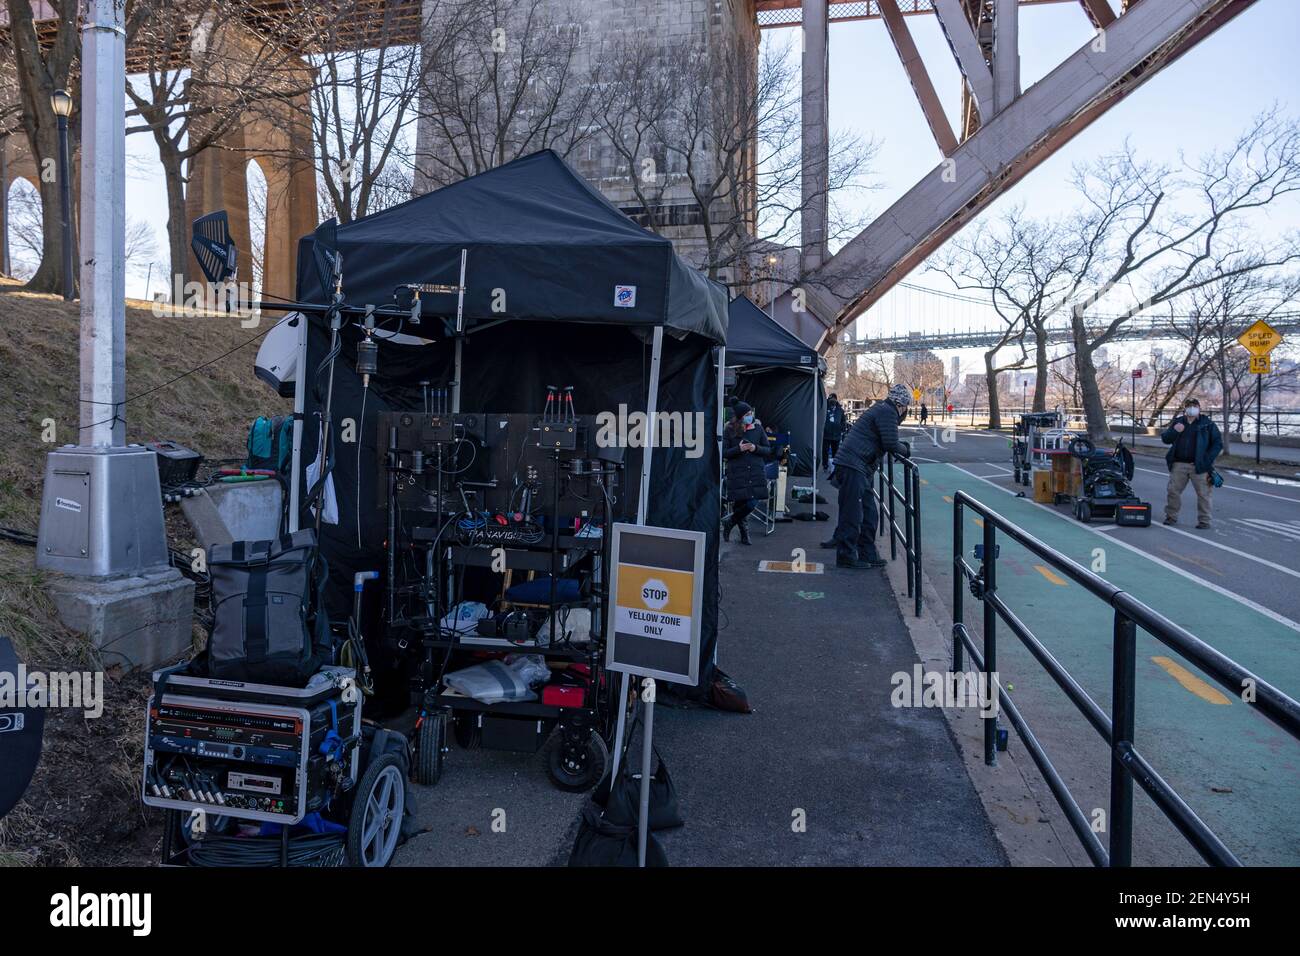 NEW YORK, NY – FEBRUARY 25: Crew and sound equipment seen during the filming of the television show 'Blue Bloods' season eleven in Astoria Park on February 25, 2021 in New York City. Credit: Ron Adar/Alamy Live News Stock Photo